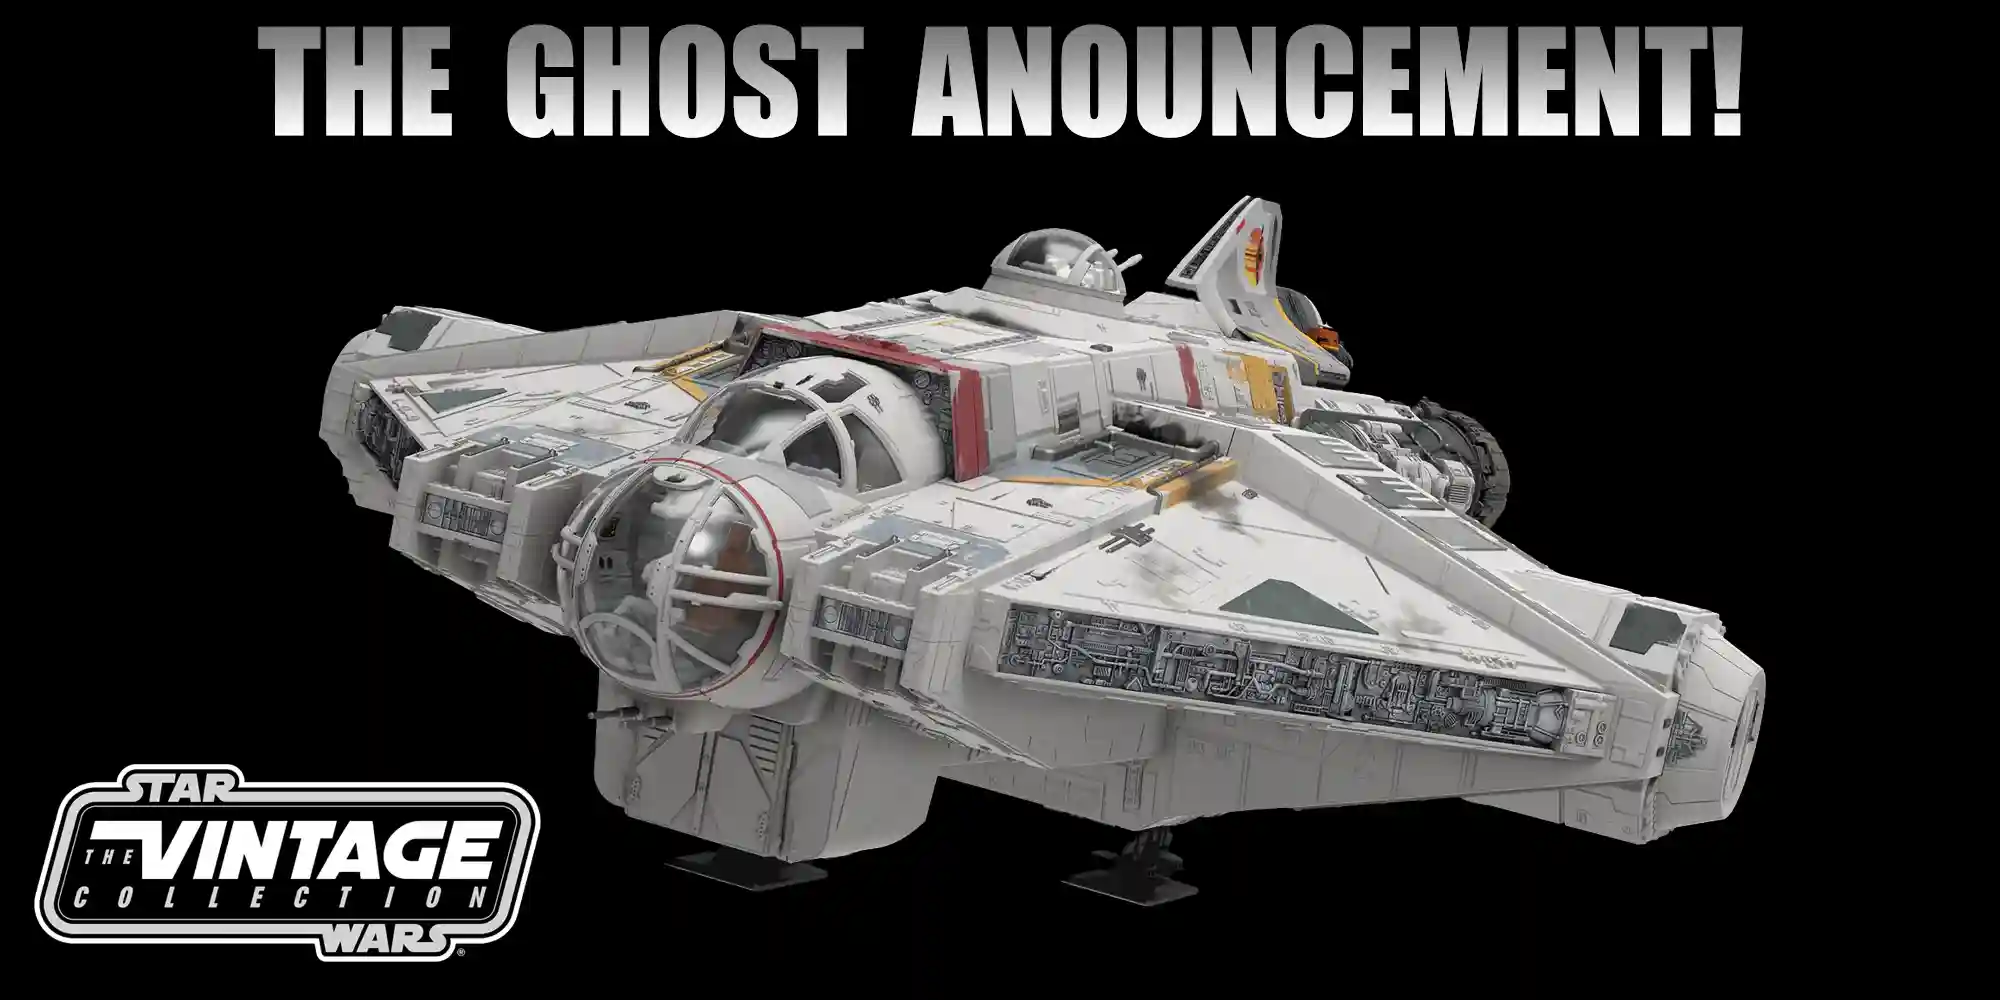 Hasbro Announces THE GHOST As Their Next Big Ticket HasLab Item!